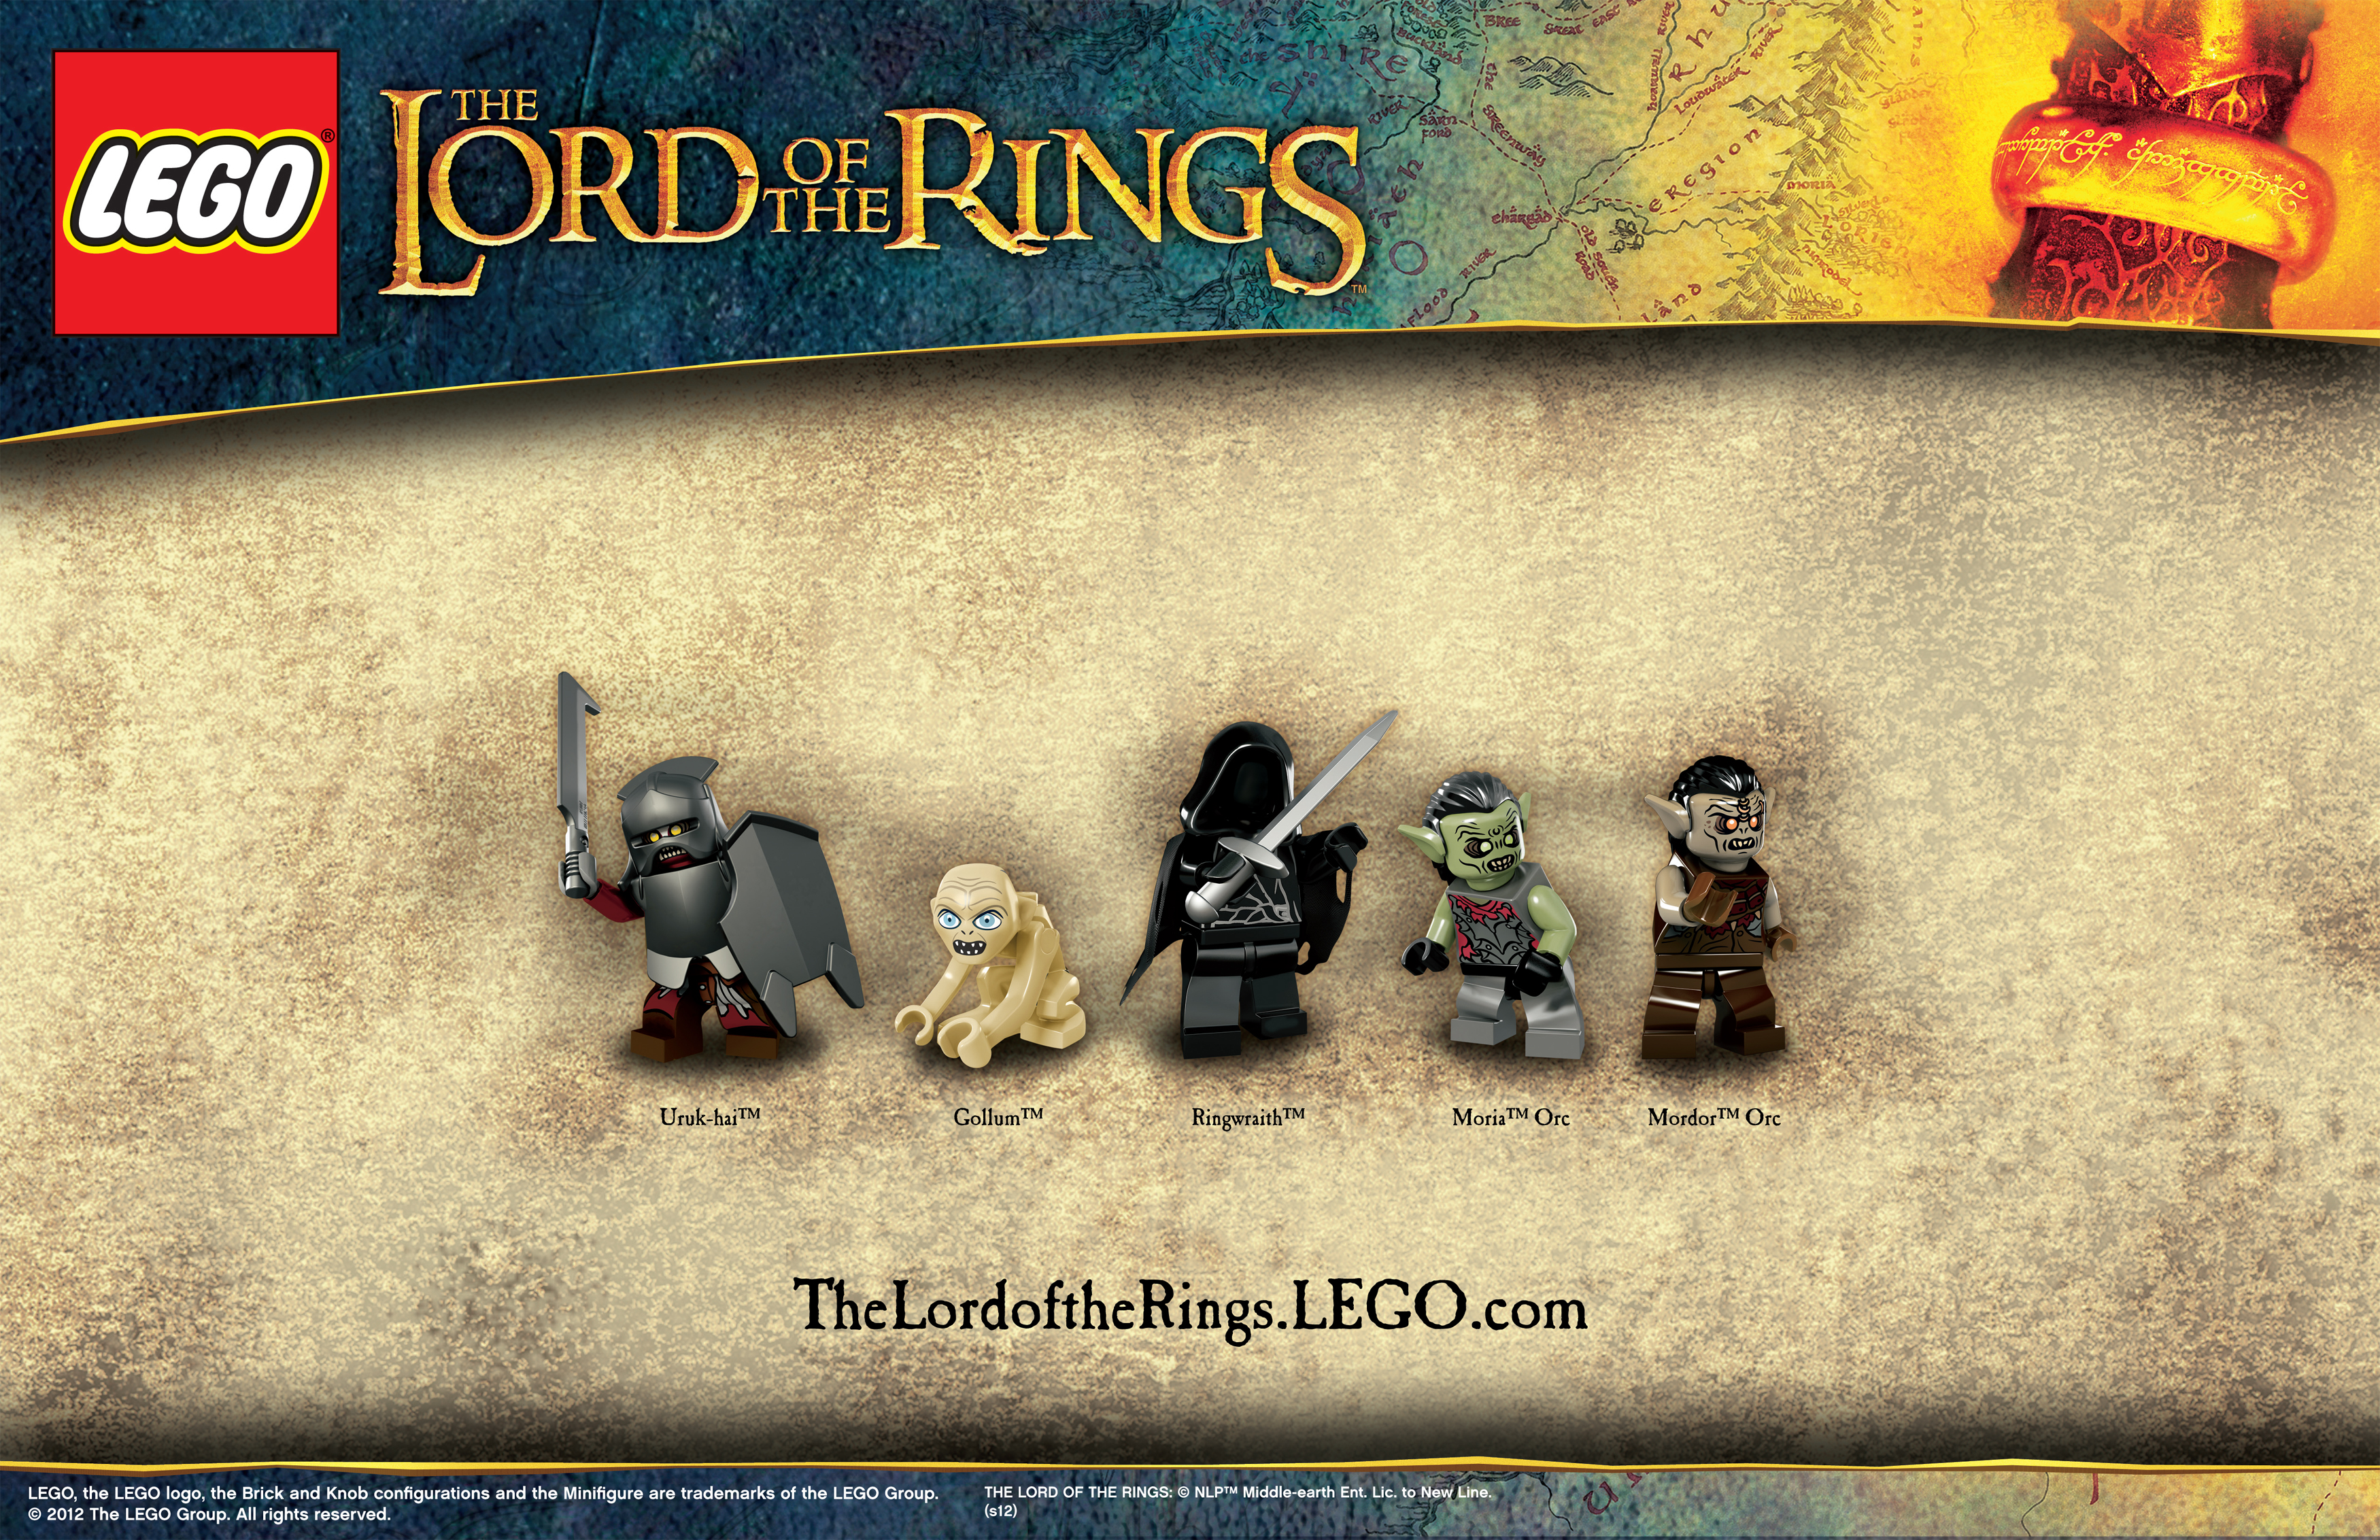 Lego-lord-of-the-rings-character-lineup-image-2-600x387.jpg